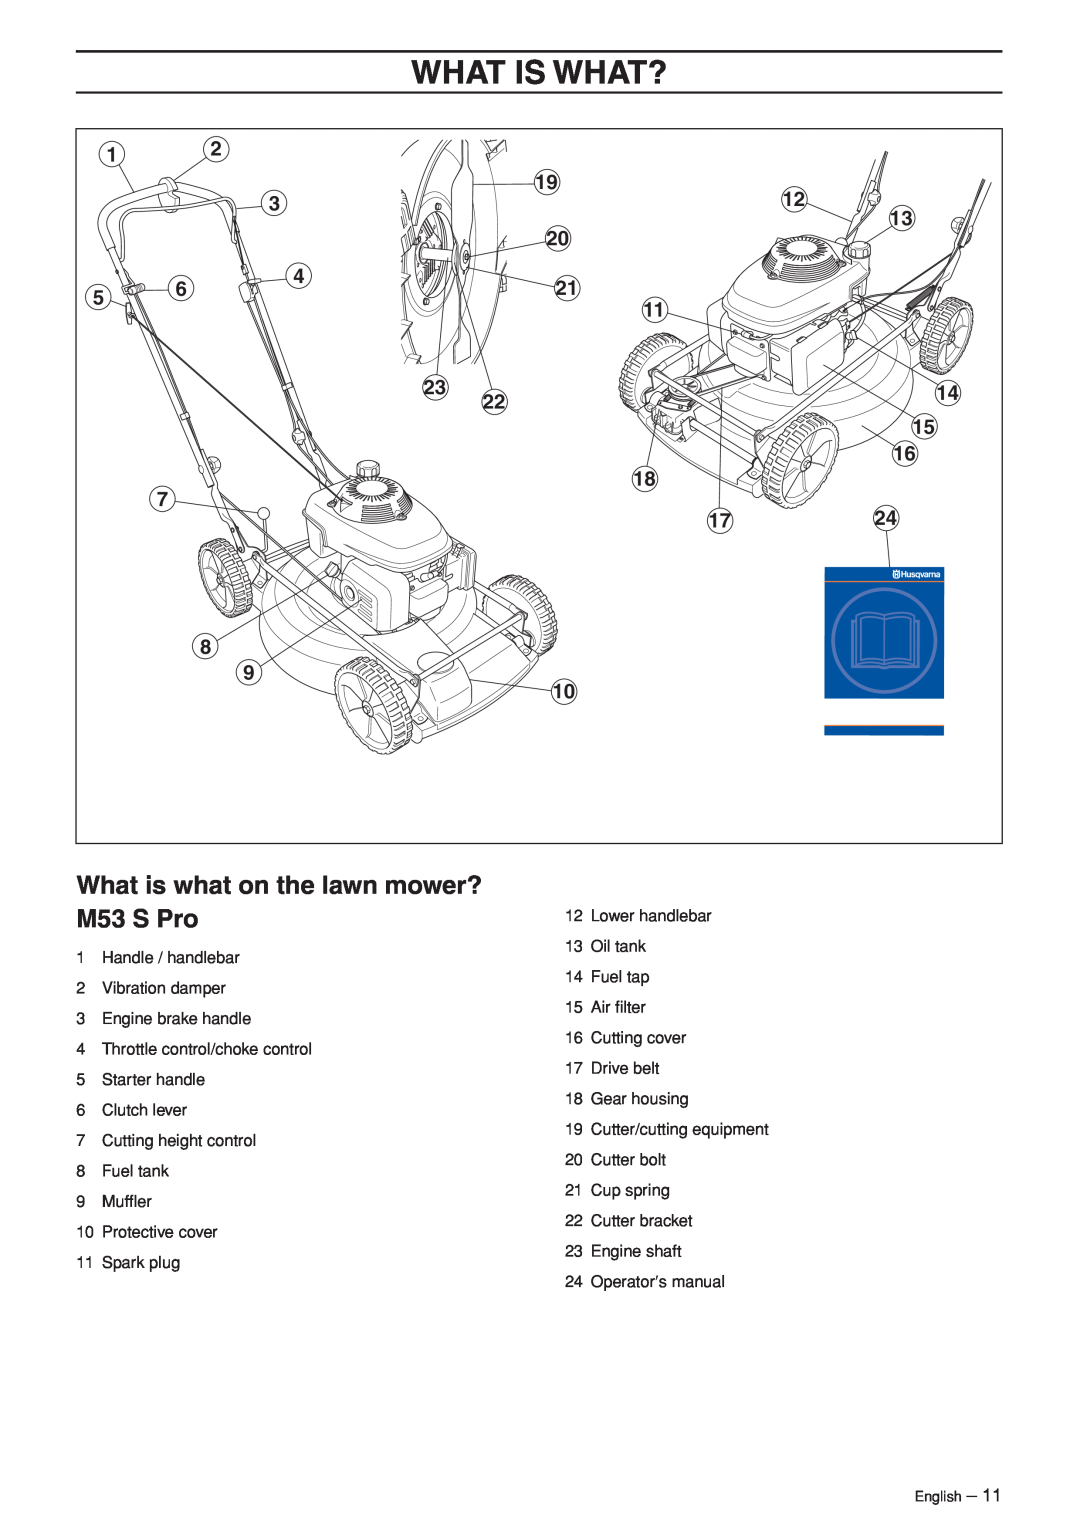 Ryobi M48 Pro manual M53 S Pro, What Is What?, What is what on the lawn mower? 